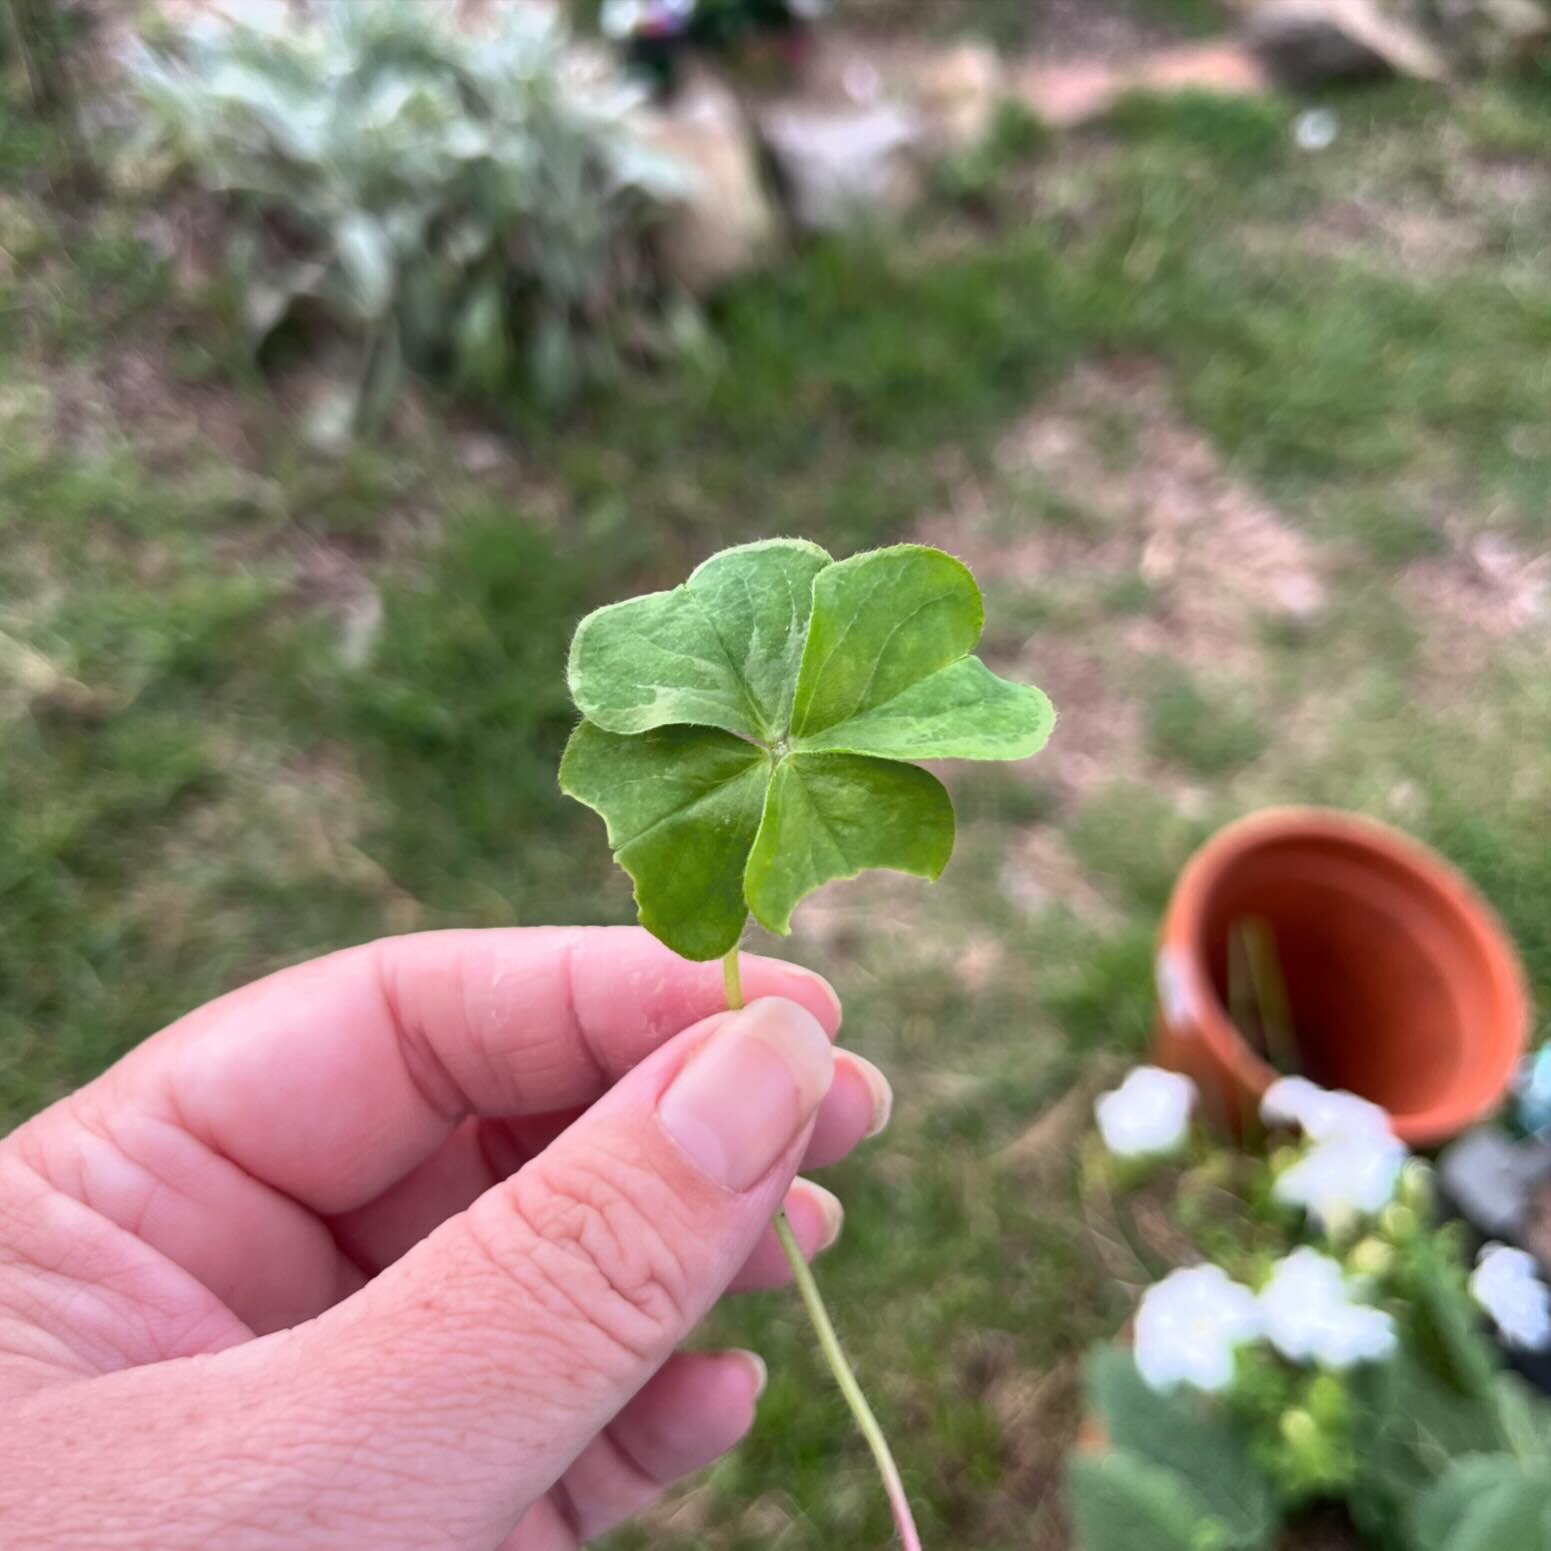 Happy St Paddy&rsquo;s Day from me and this partially chewed four leaf clover. A good reminder that not  everything has to be perfect to have value 🍀

#StPatricksDay #FourLeafClover